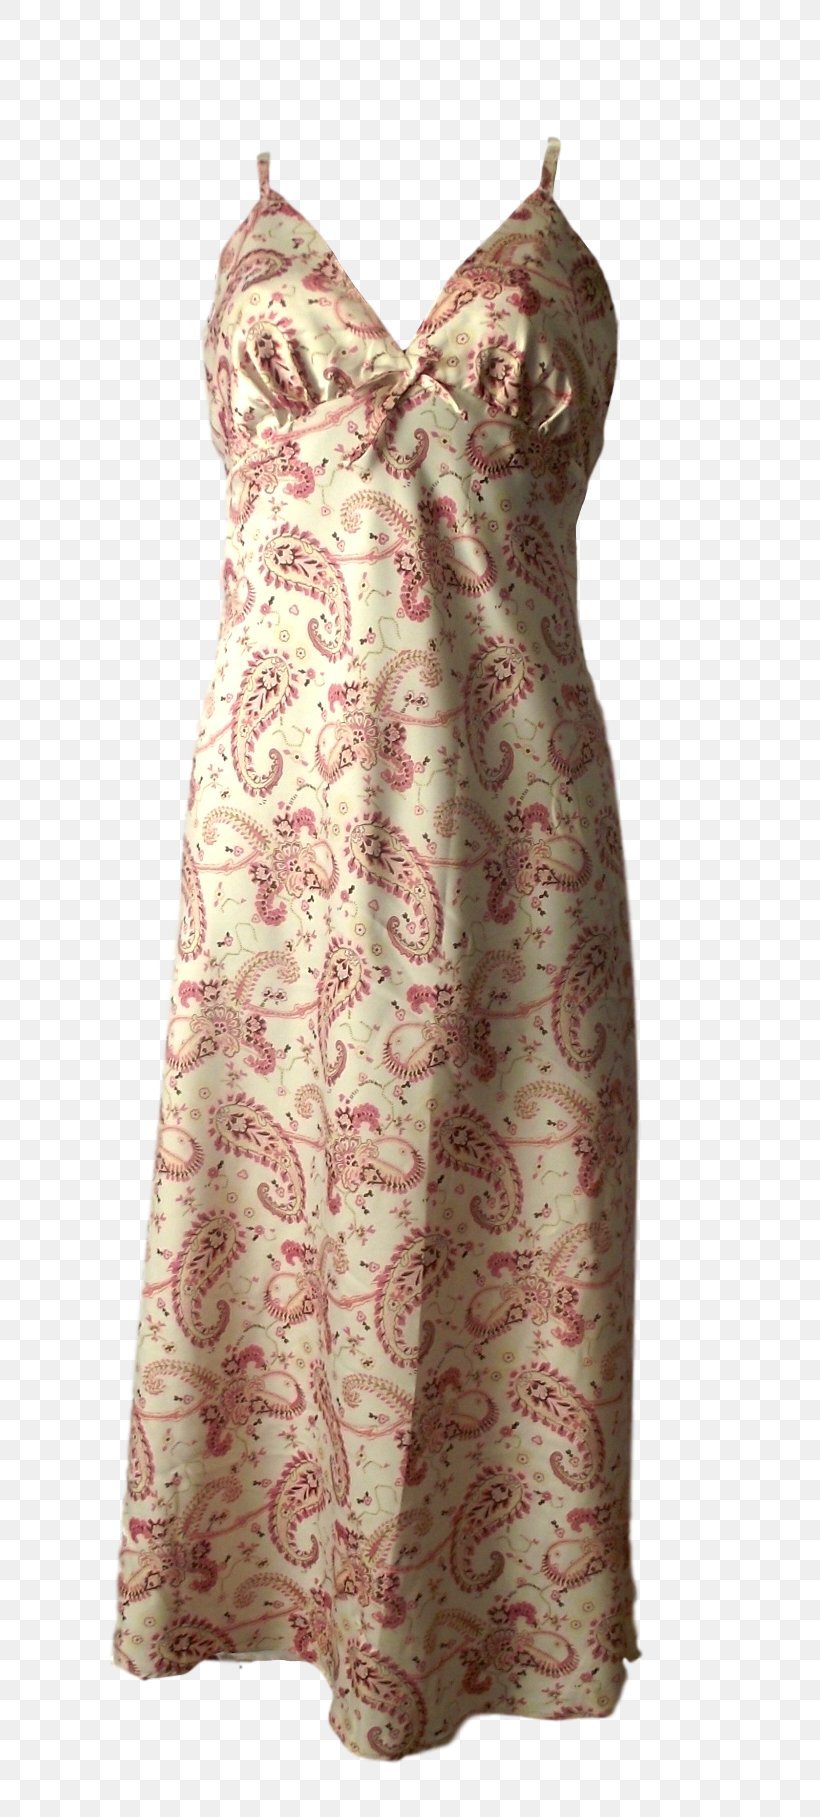 Cocktail Dress Costume Design Paisley, PNG, 737x1817px, Cocktail, Clothing, Cocktail Dress, Costume, Costume Design Download Free